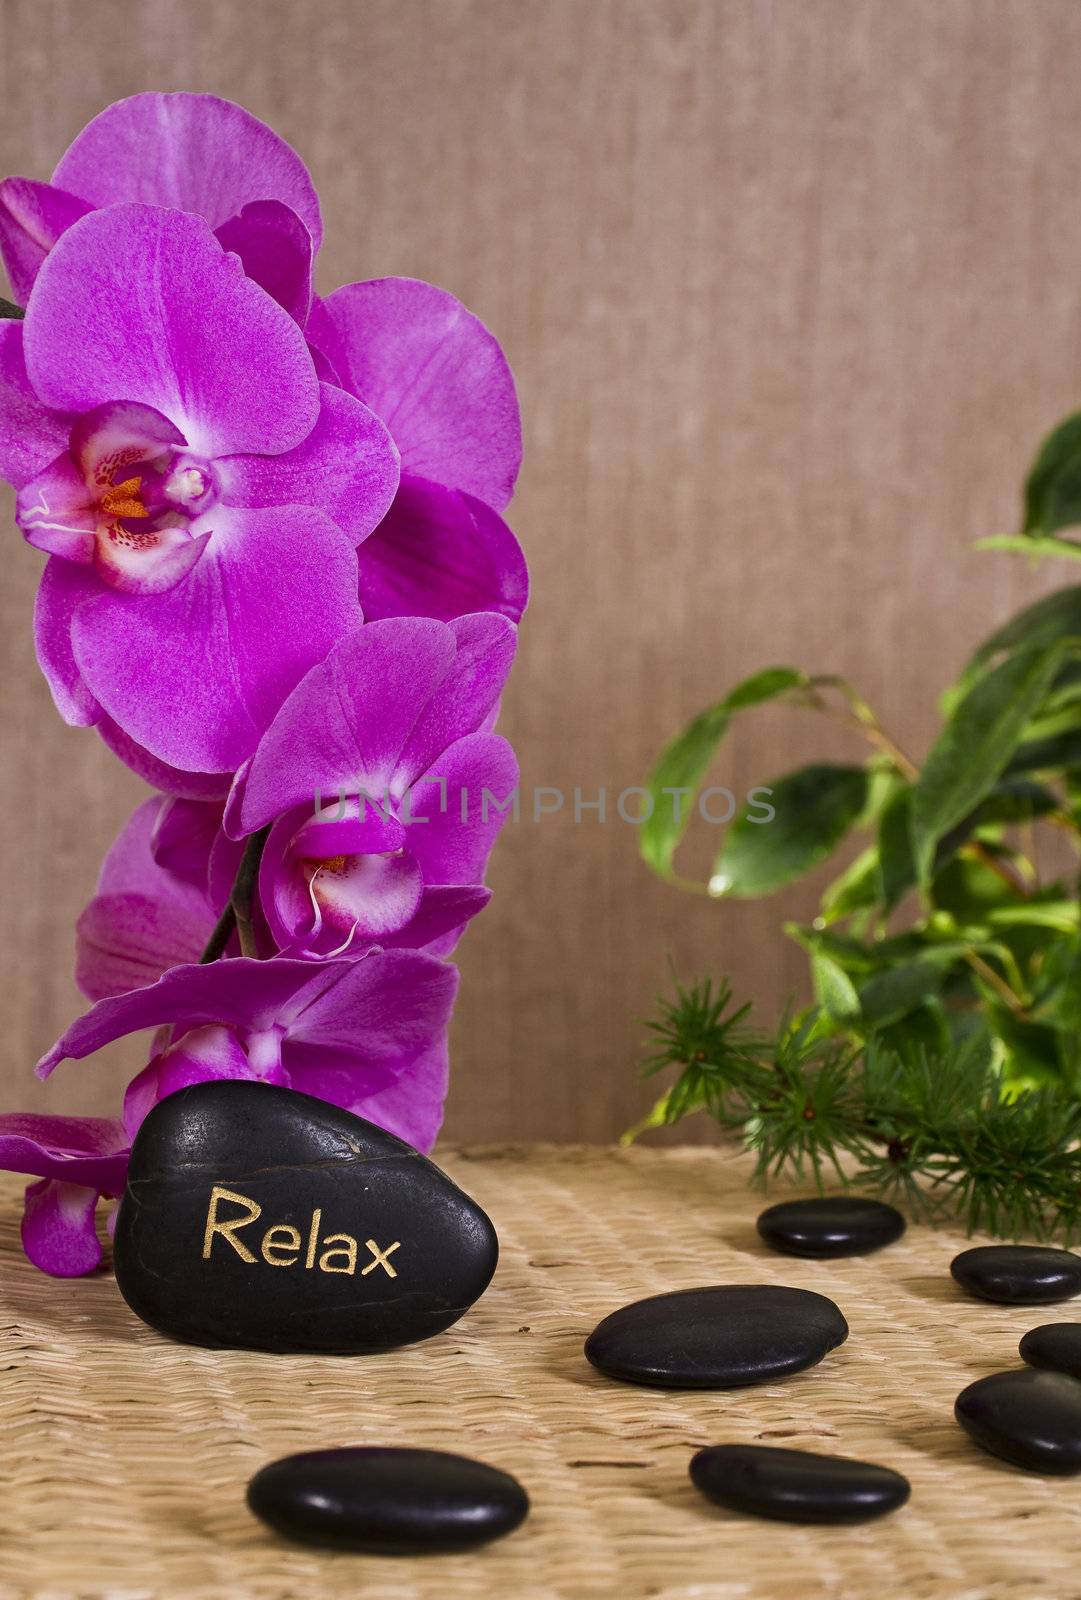 Relax Spa Concept - Zen Stones With Pink Orchid and Ficus Flowers